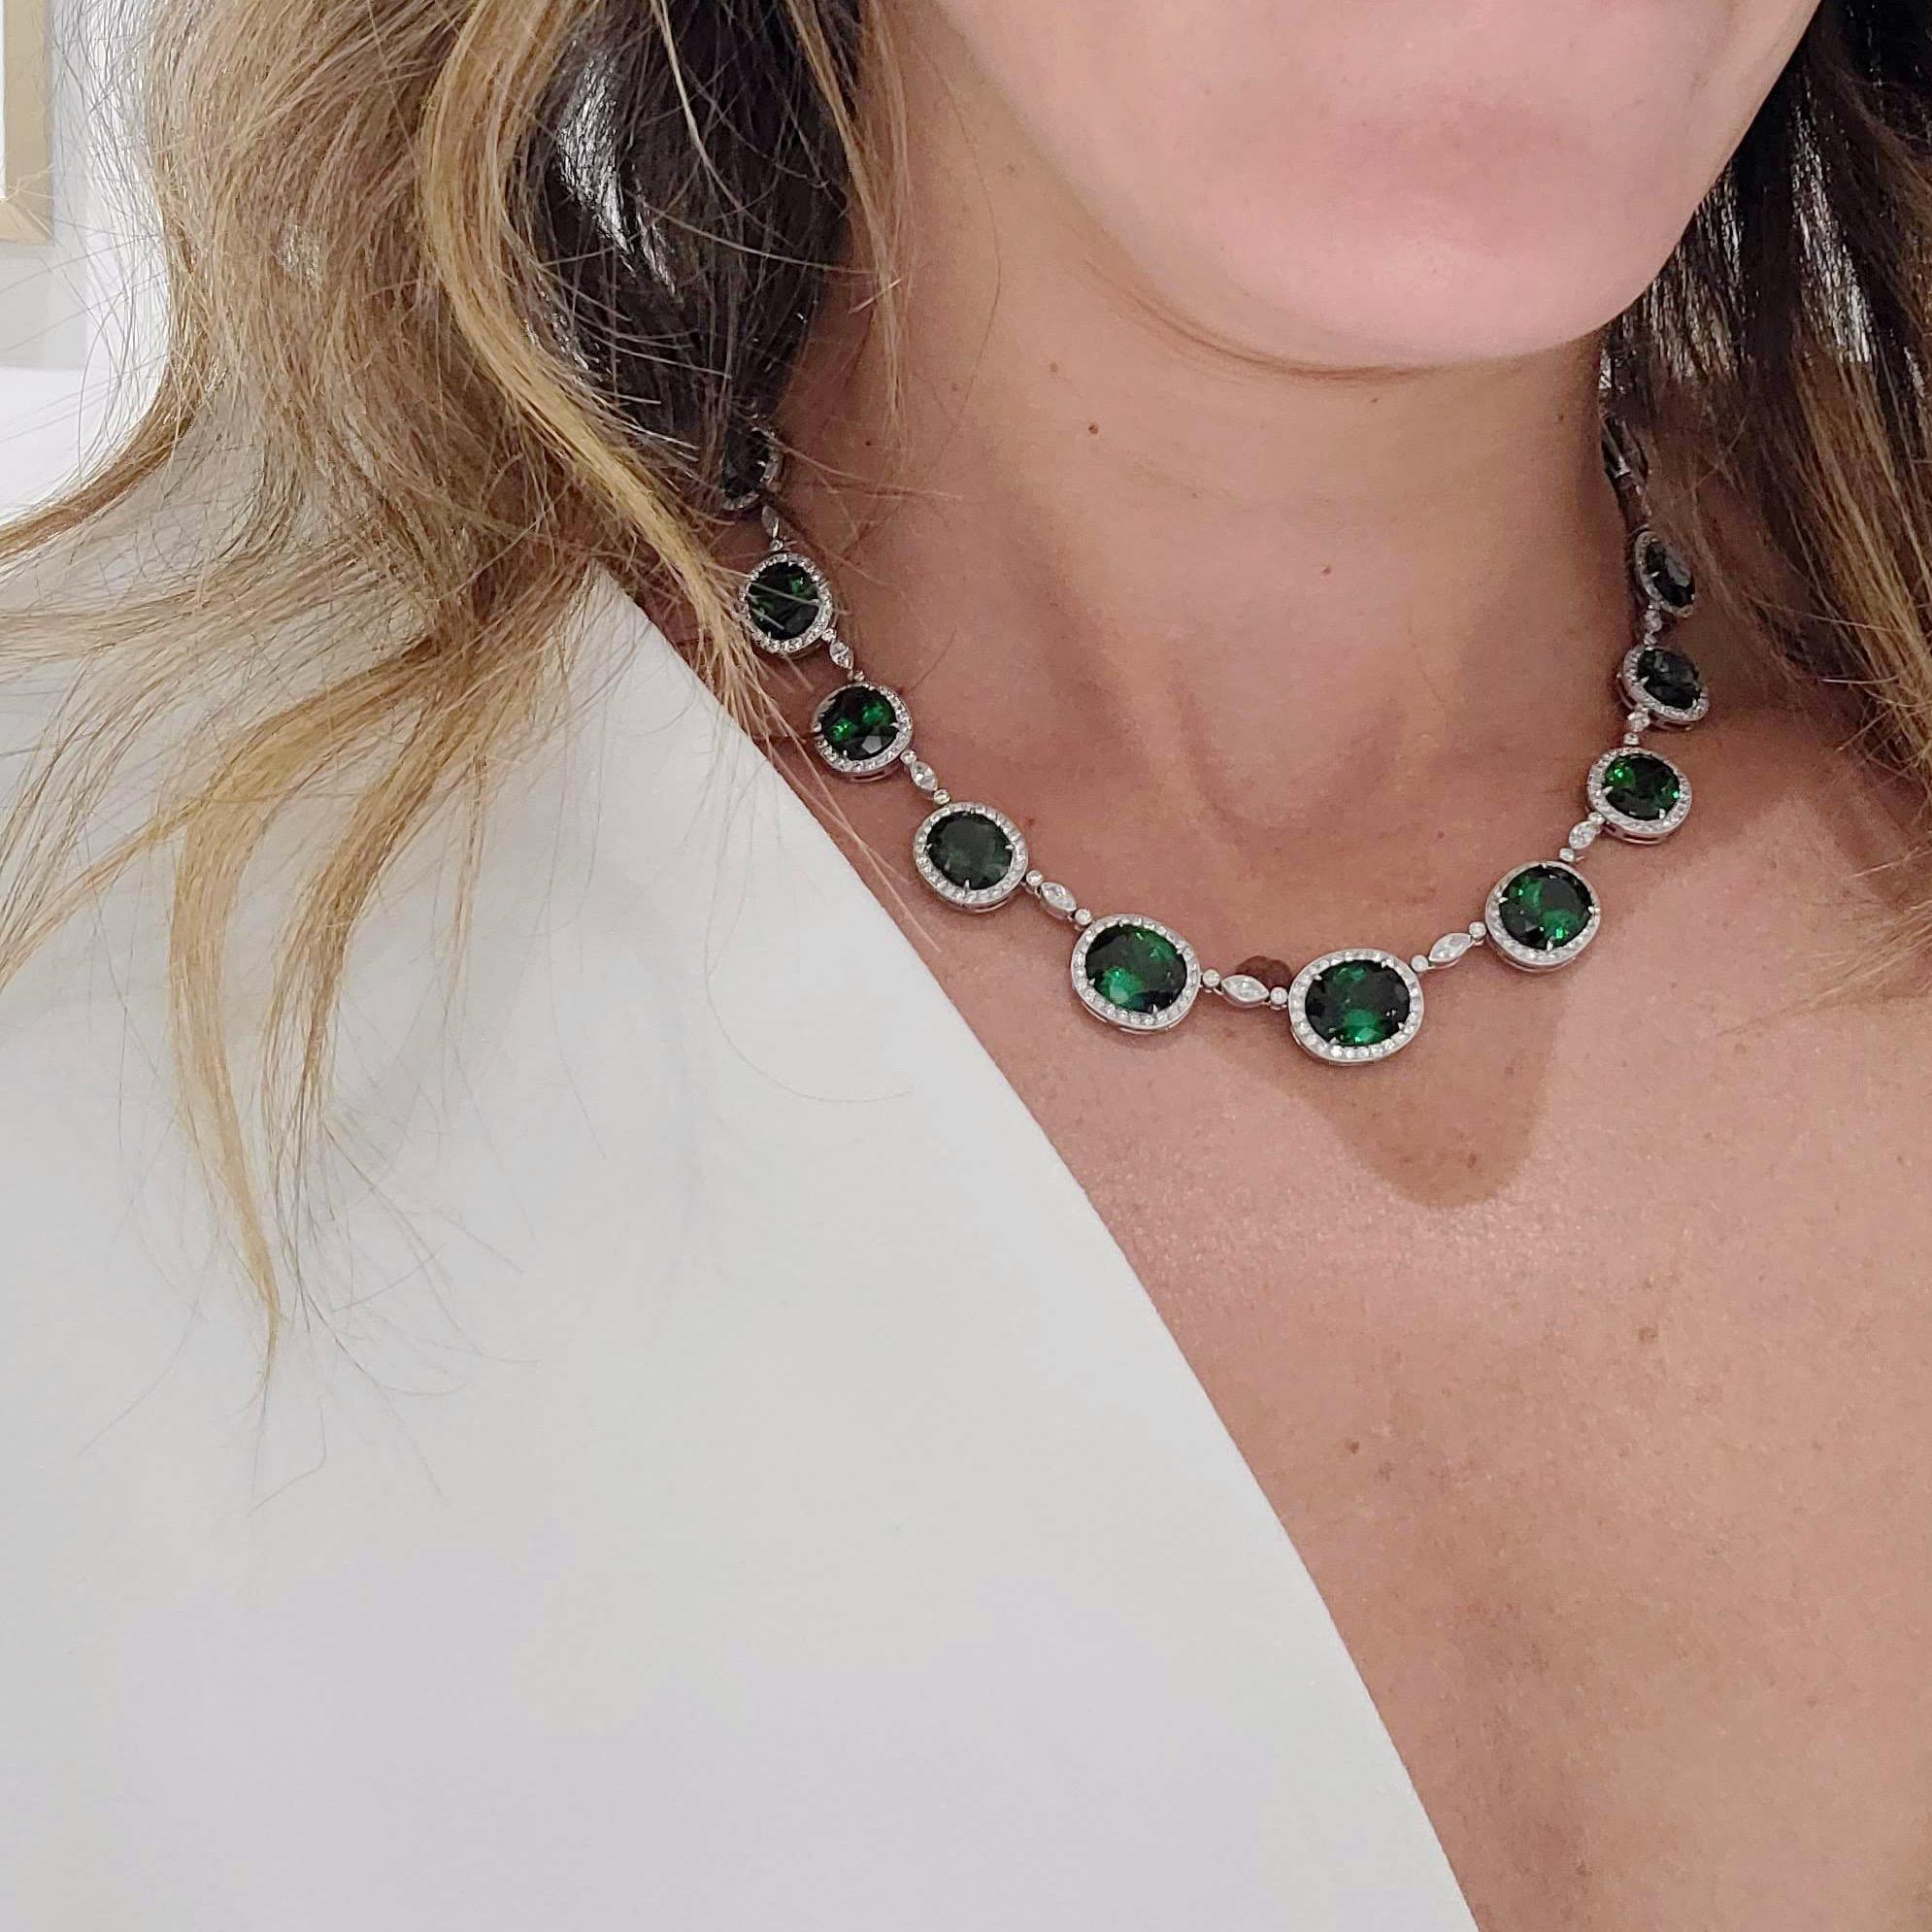 Magnificent platinum necklace. This necklace is designed with 22 oval Chrome Tourmalines. Each stone is framed with round brilliant Diamonds. A  single marquis and two round brilliant Diamonds are the connectors. The total length of the necklace is